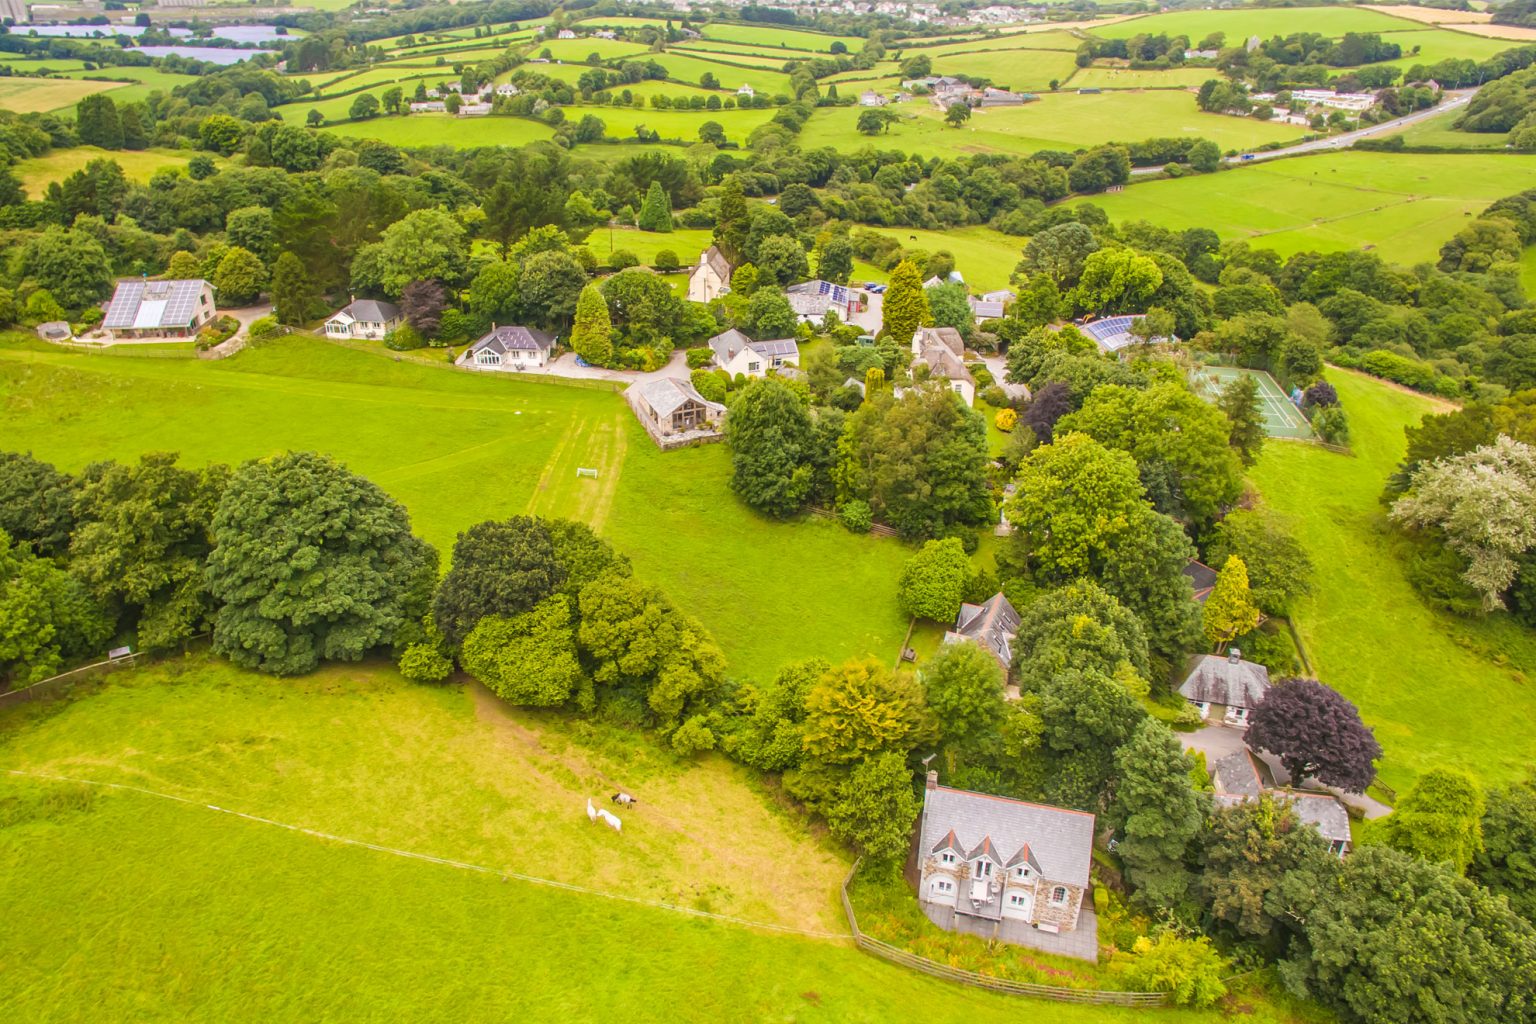 Aerial shot of Bosinver in Cornwall showing the whole site